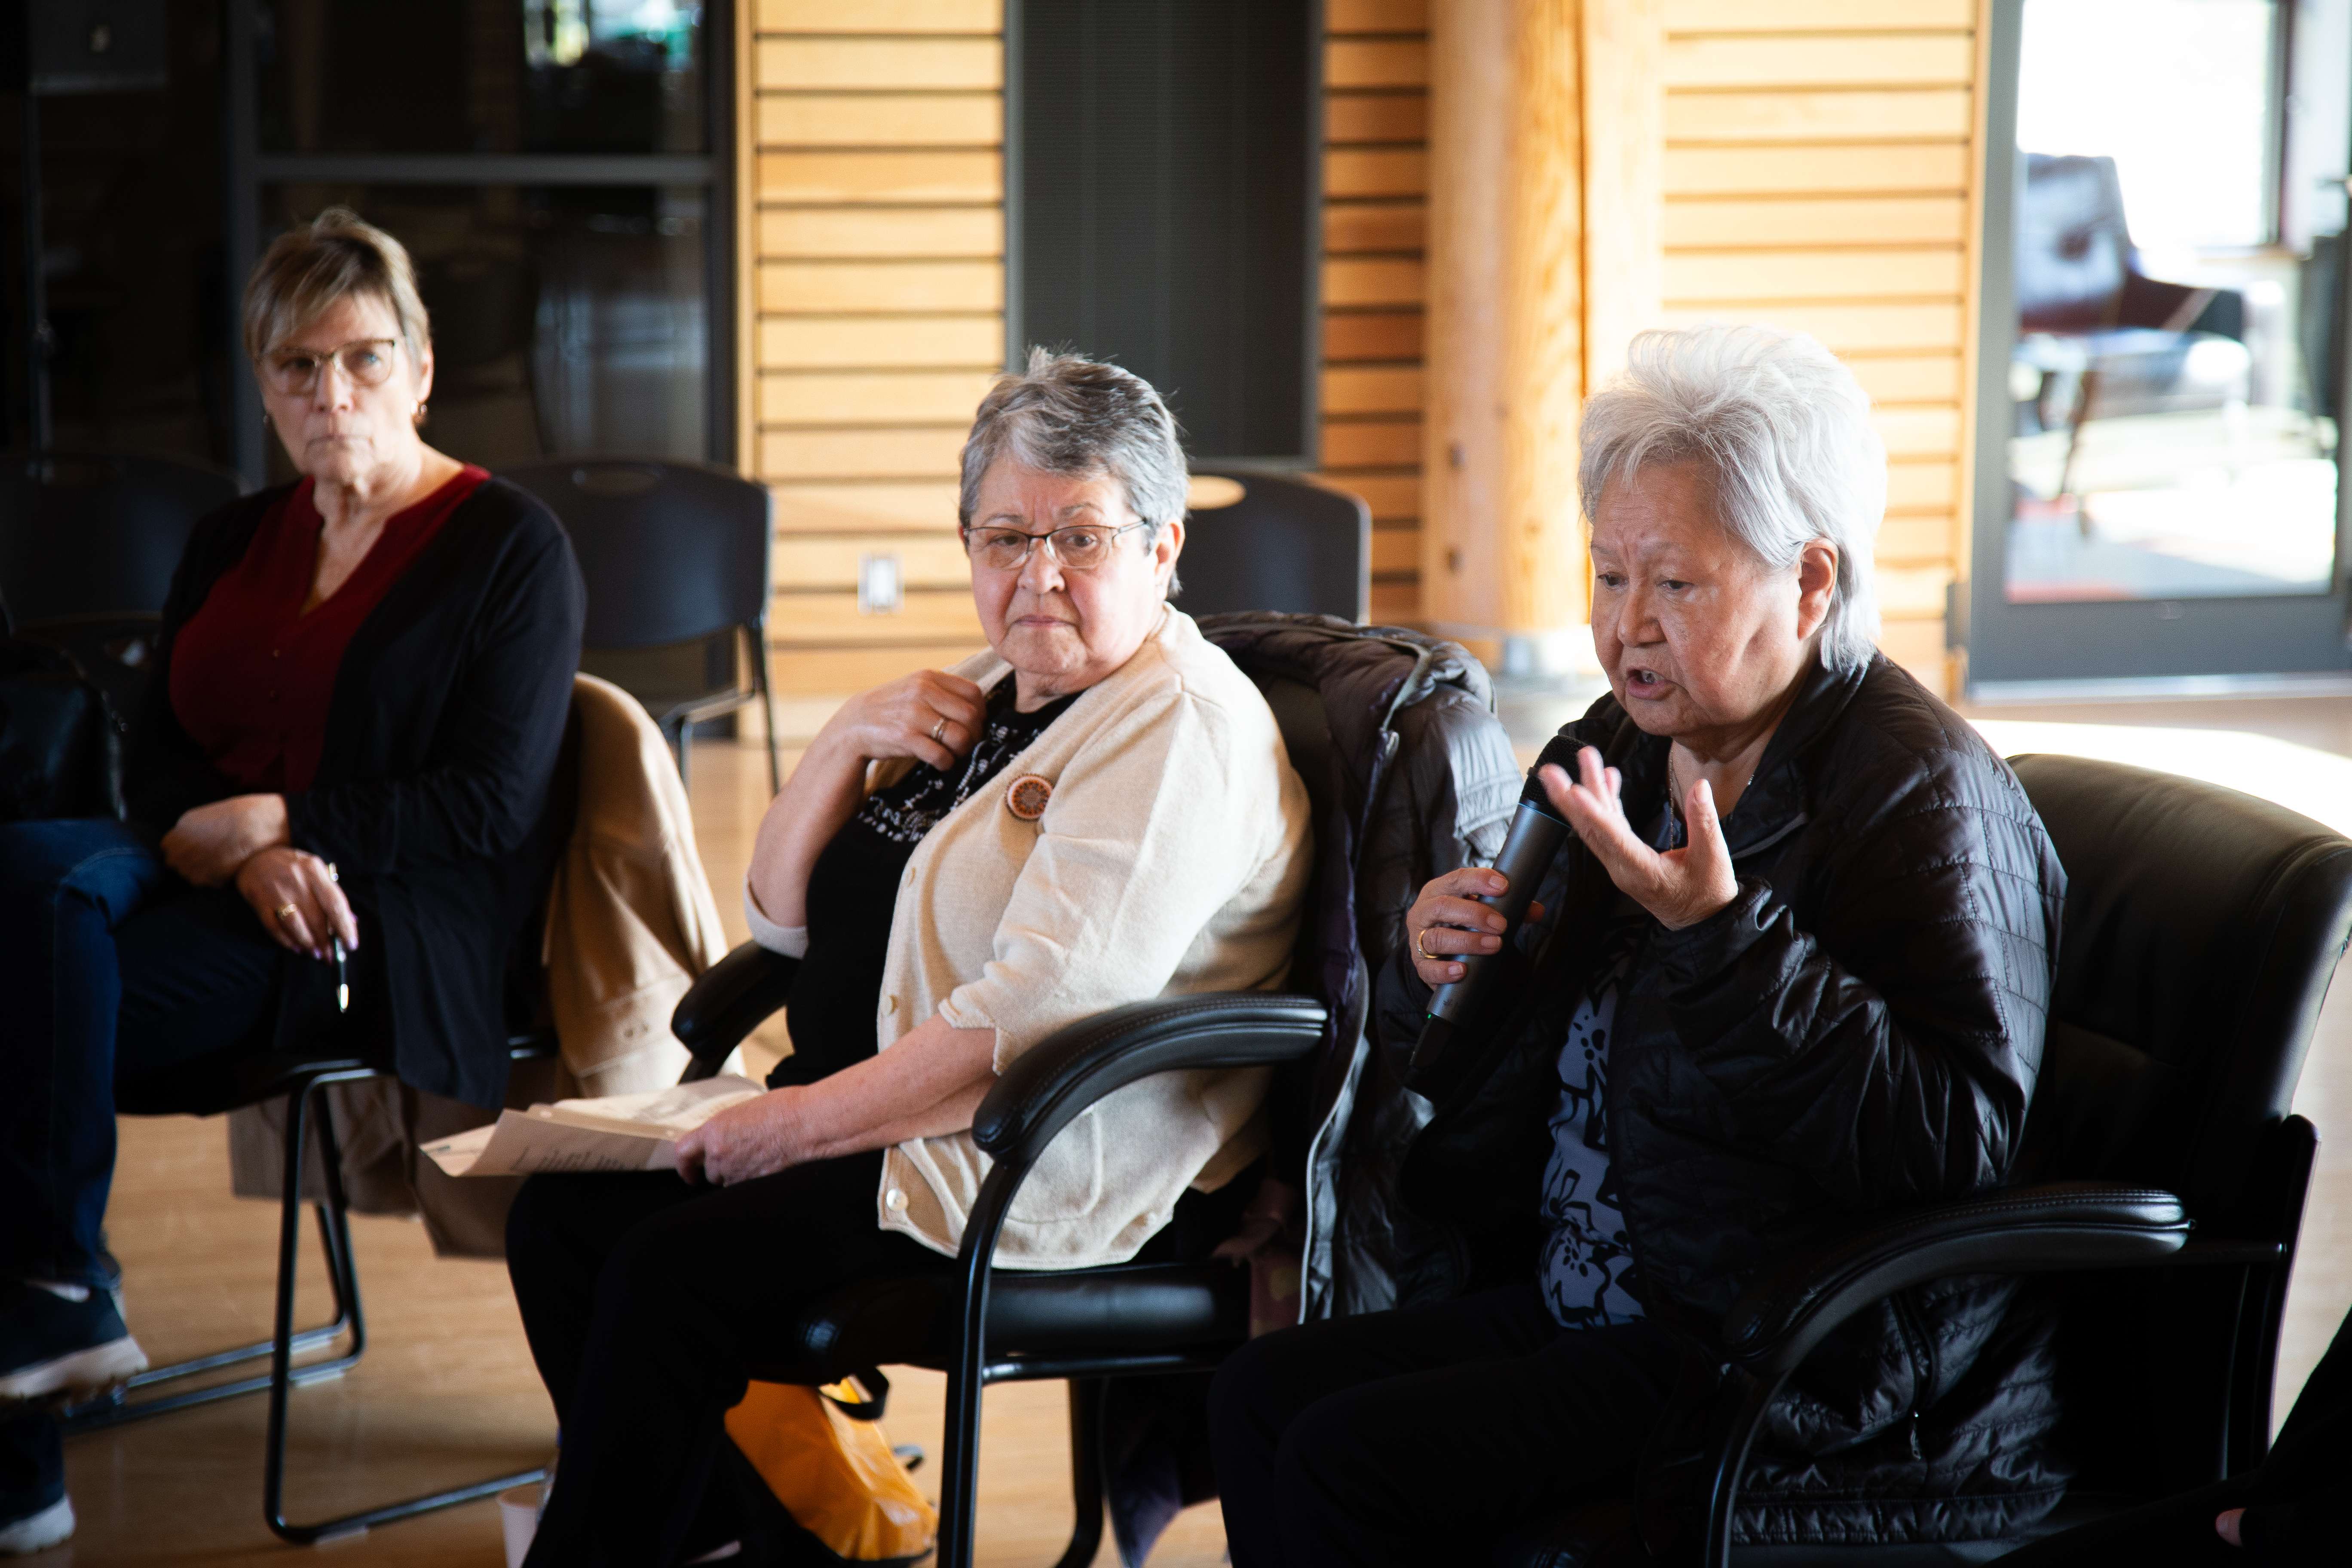 Project Manager Deborah Dupont, former Chair, Adeline Webber, and current Chair Judy Gingell of the Yukon Residential Schools and Missing Children Project speak at a community meeting in Carcross.